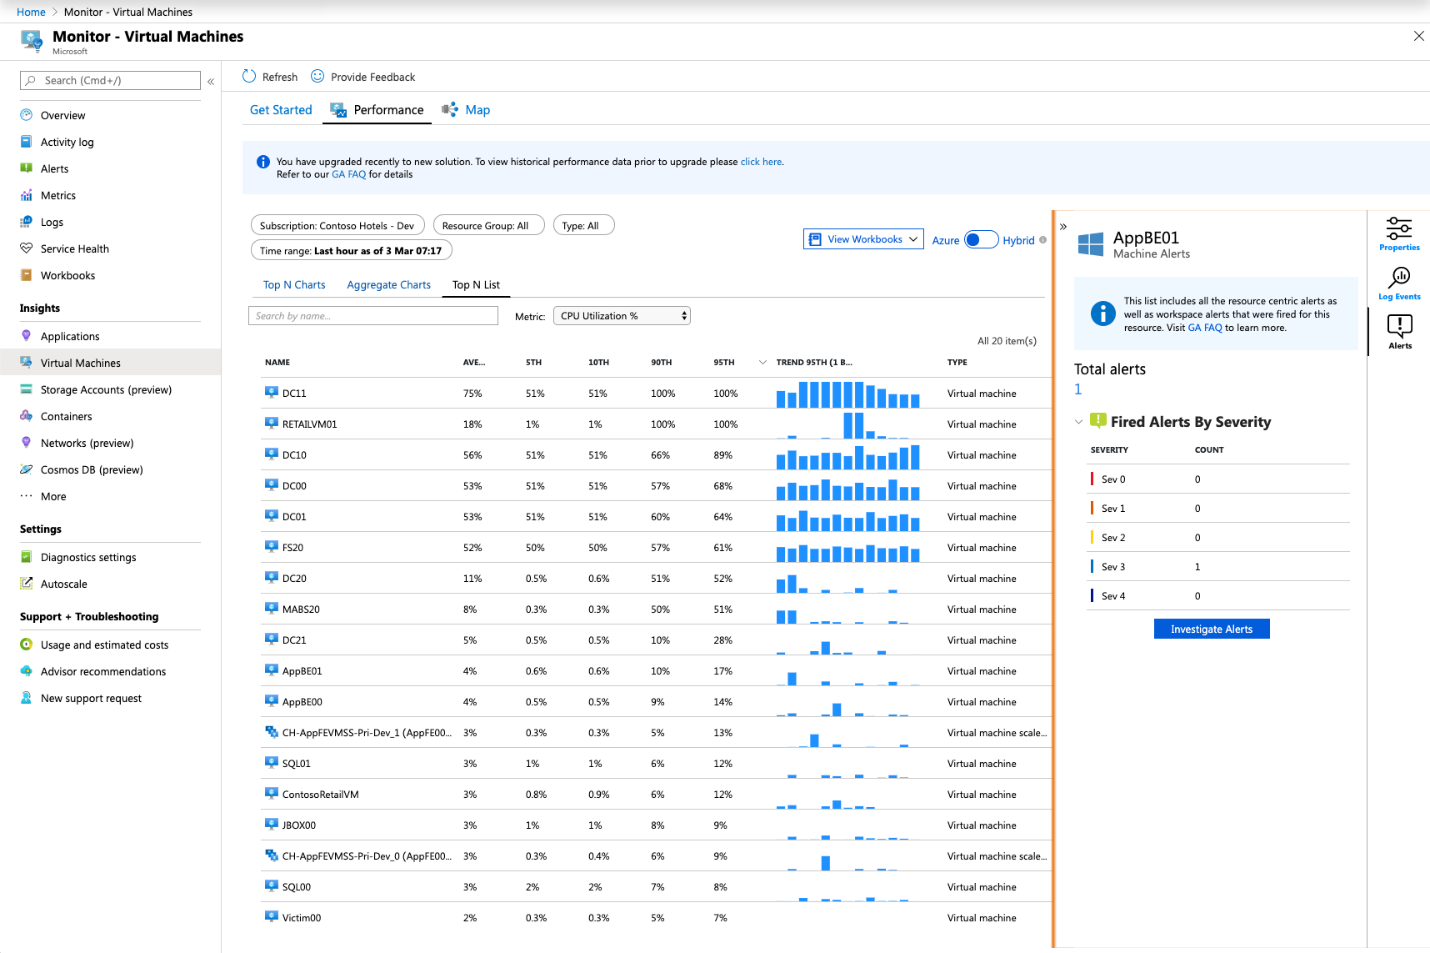 Announcing the general availability of Azure Monitor for virtual machines